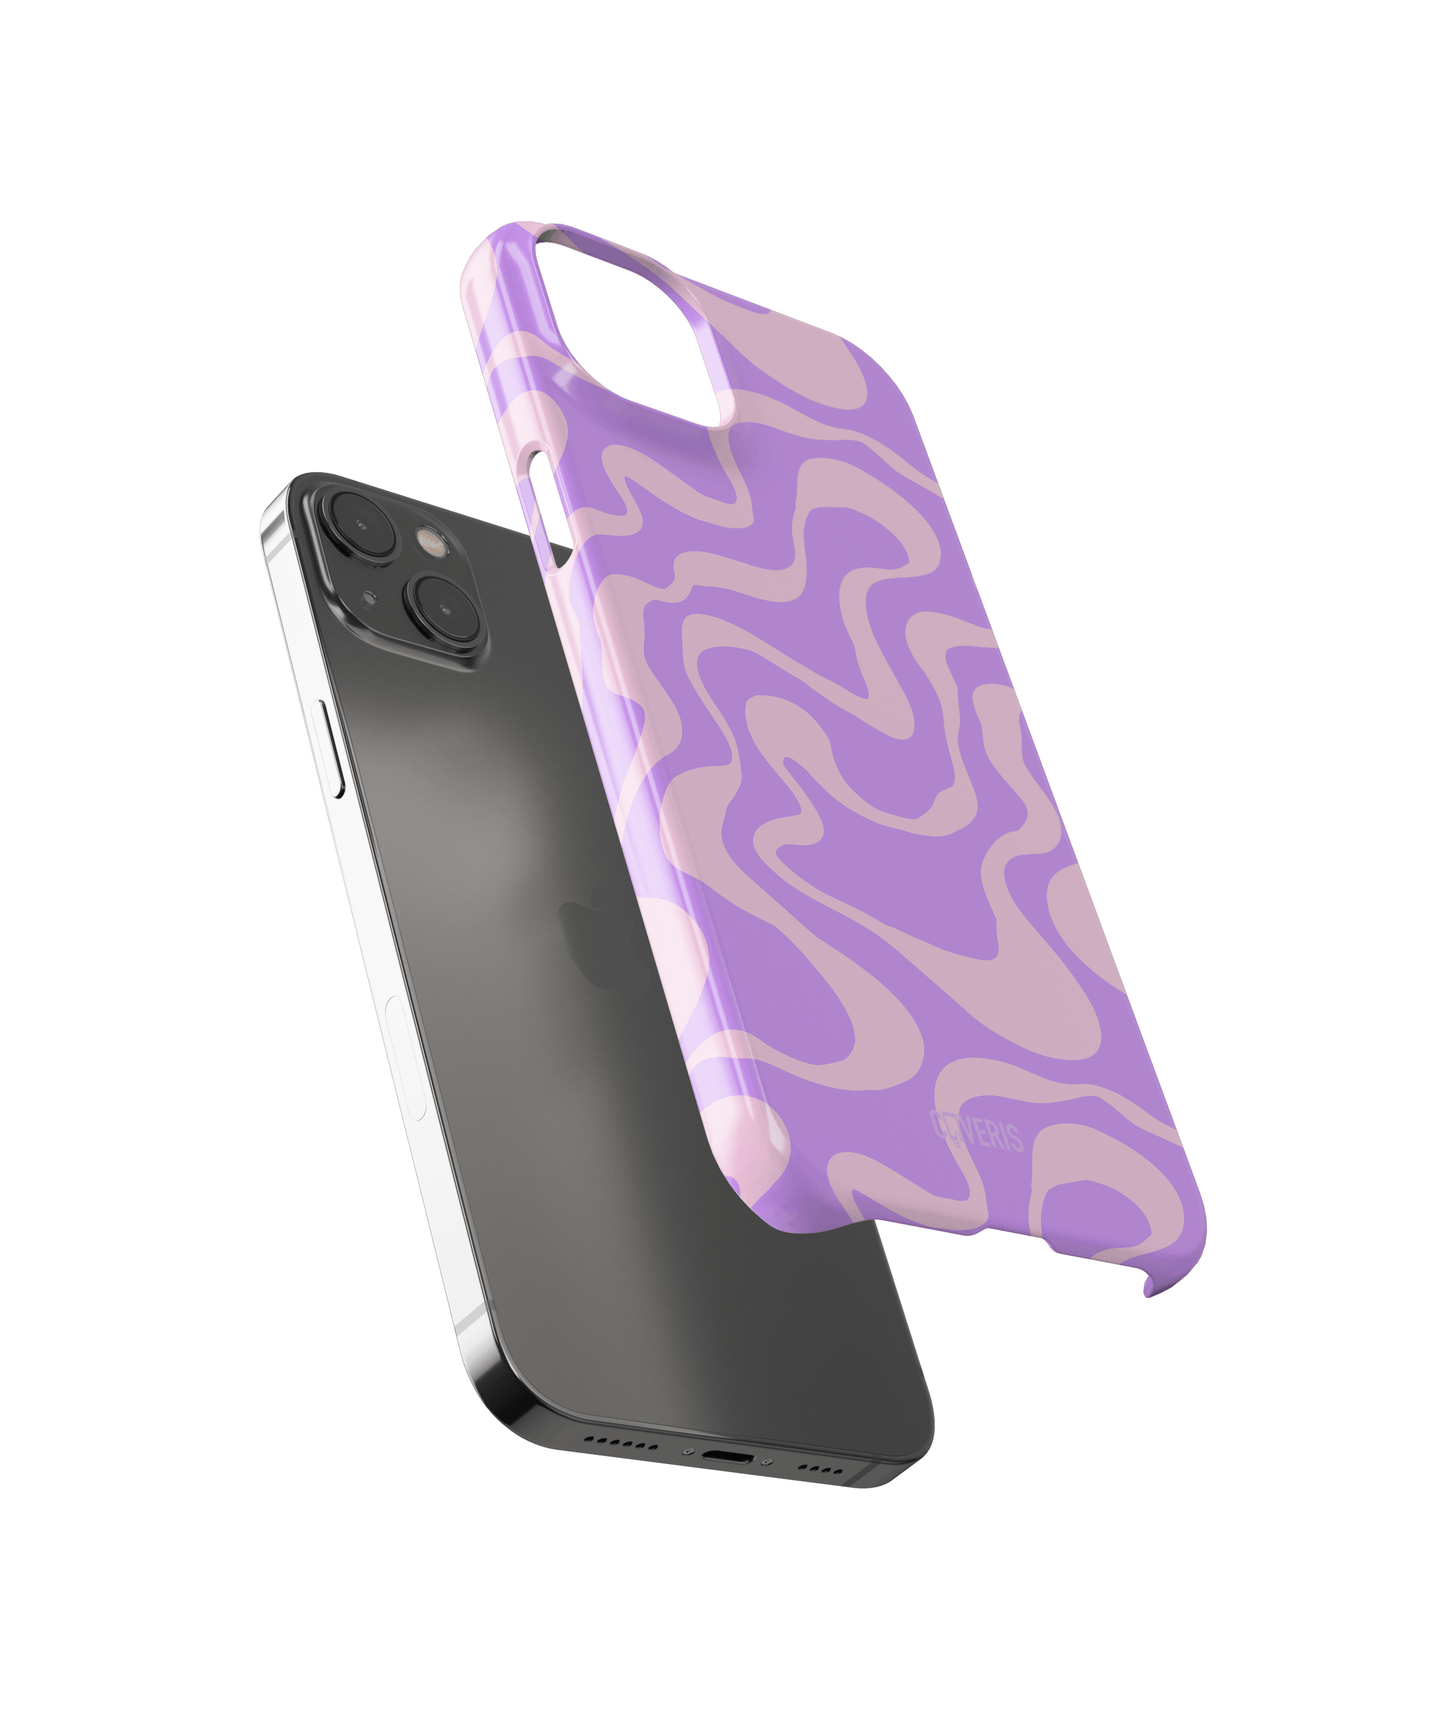 Wingwhirl - Samsung Galaxy Note 8 phone case